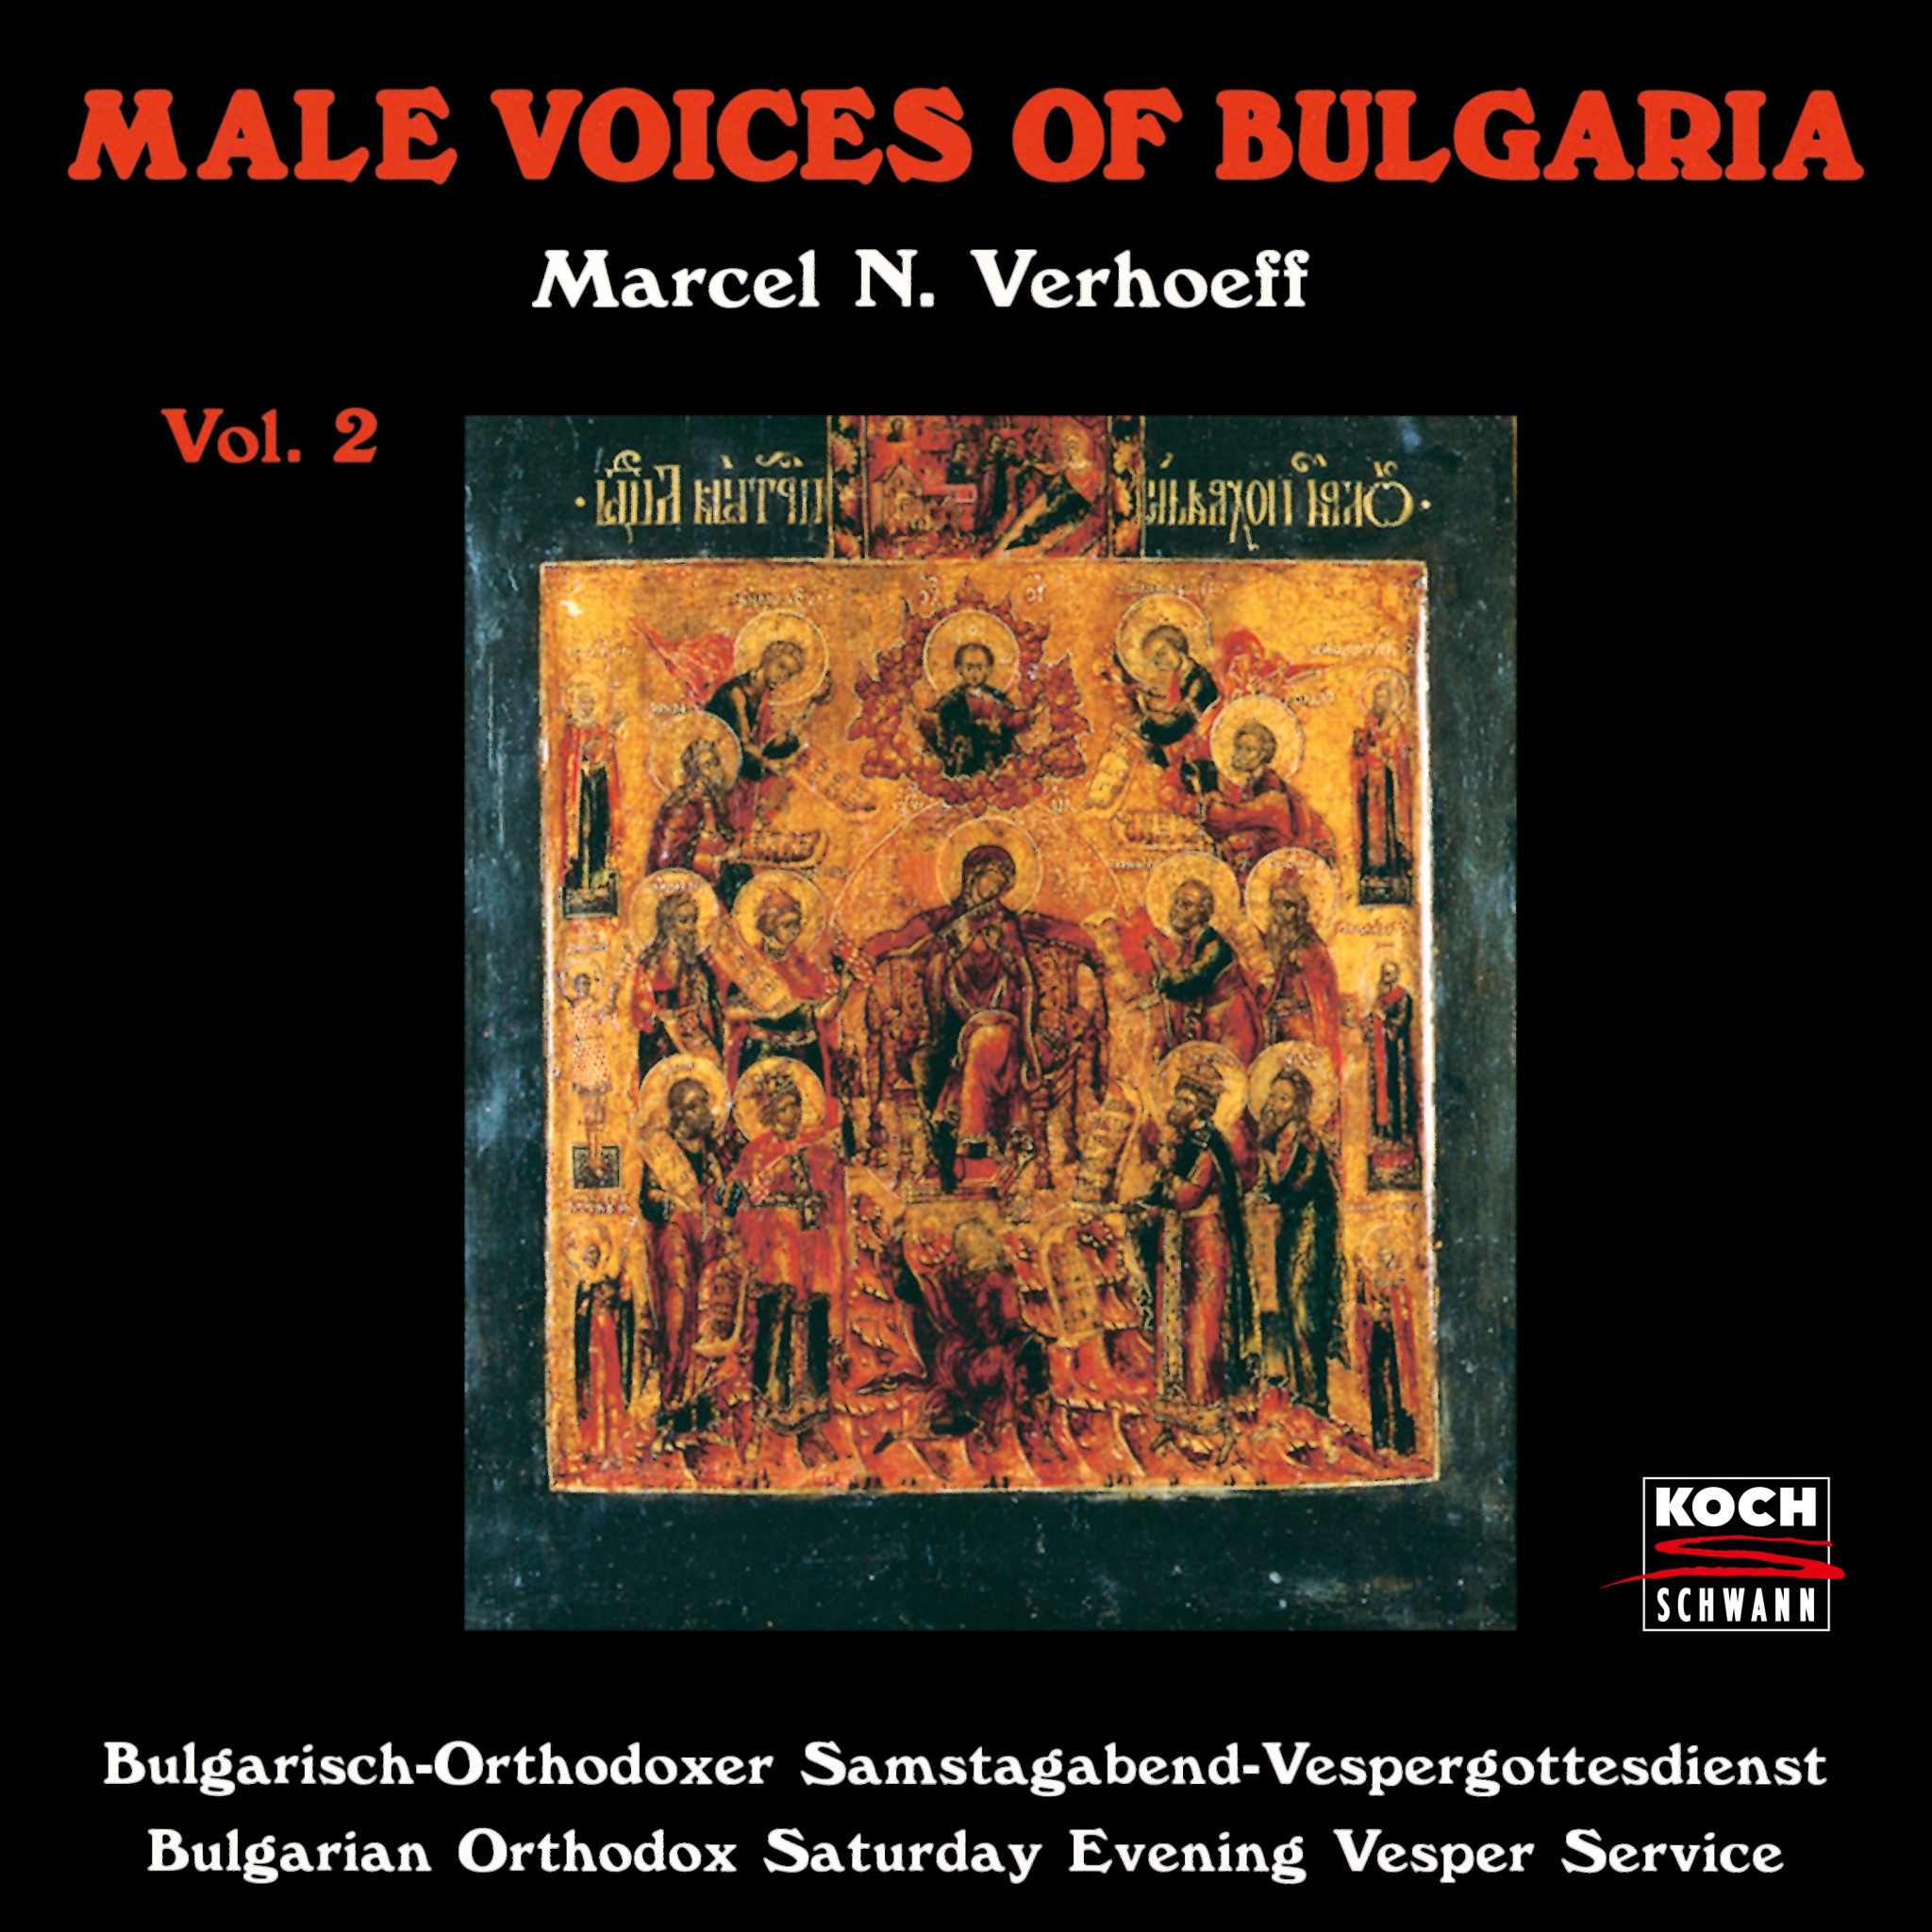 THE MALE VOICES OF BULGARIA